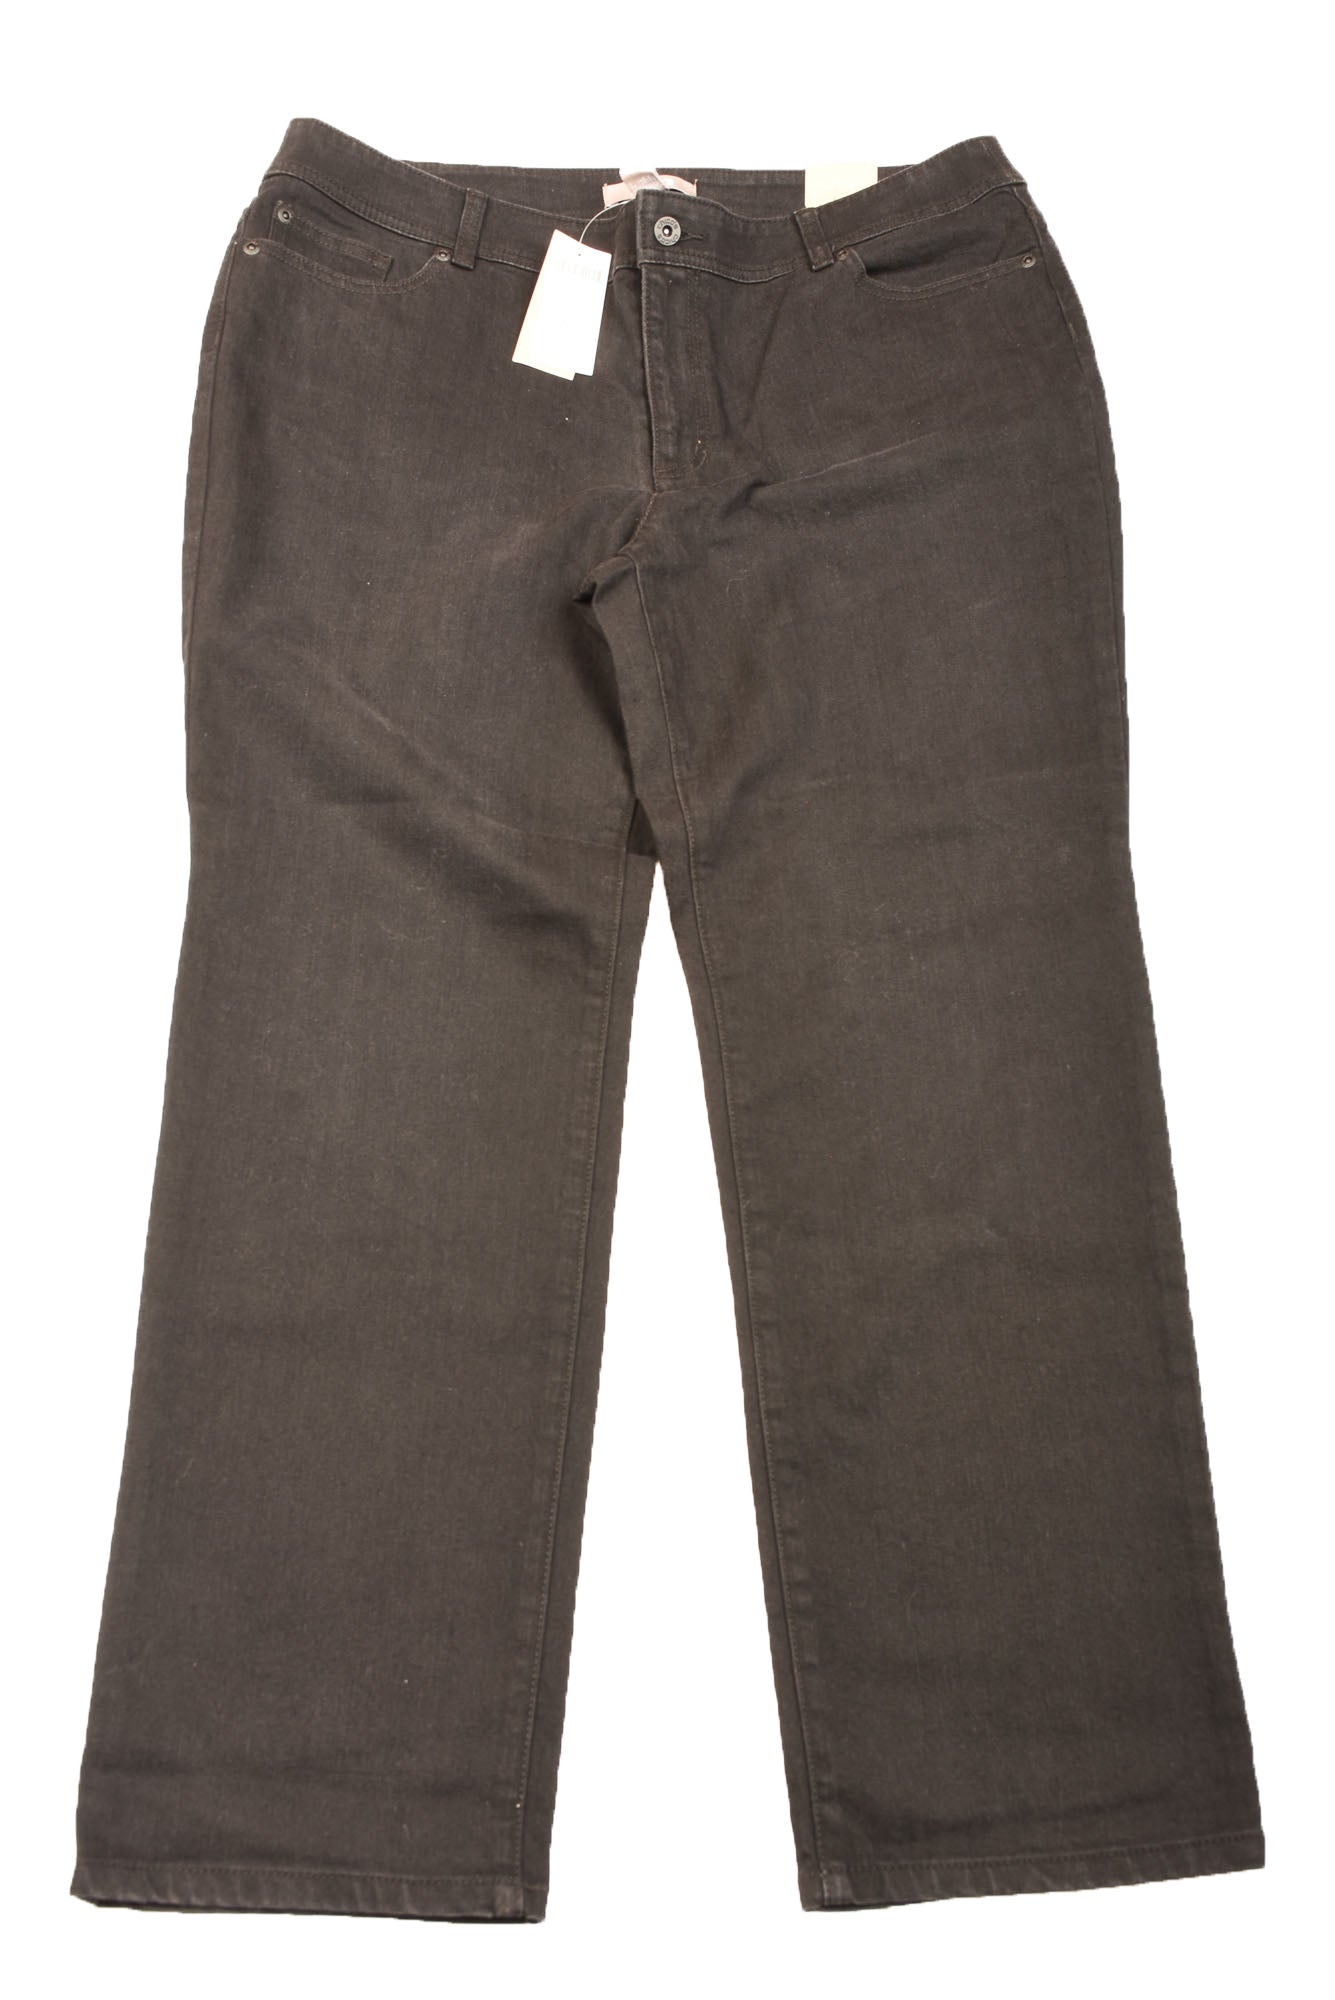 So Slimming by Chico's Brown Pants, Men's Fashion, Bottoms, Jeans